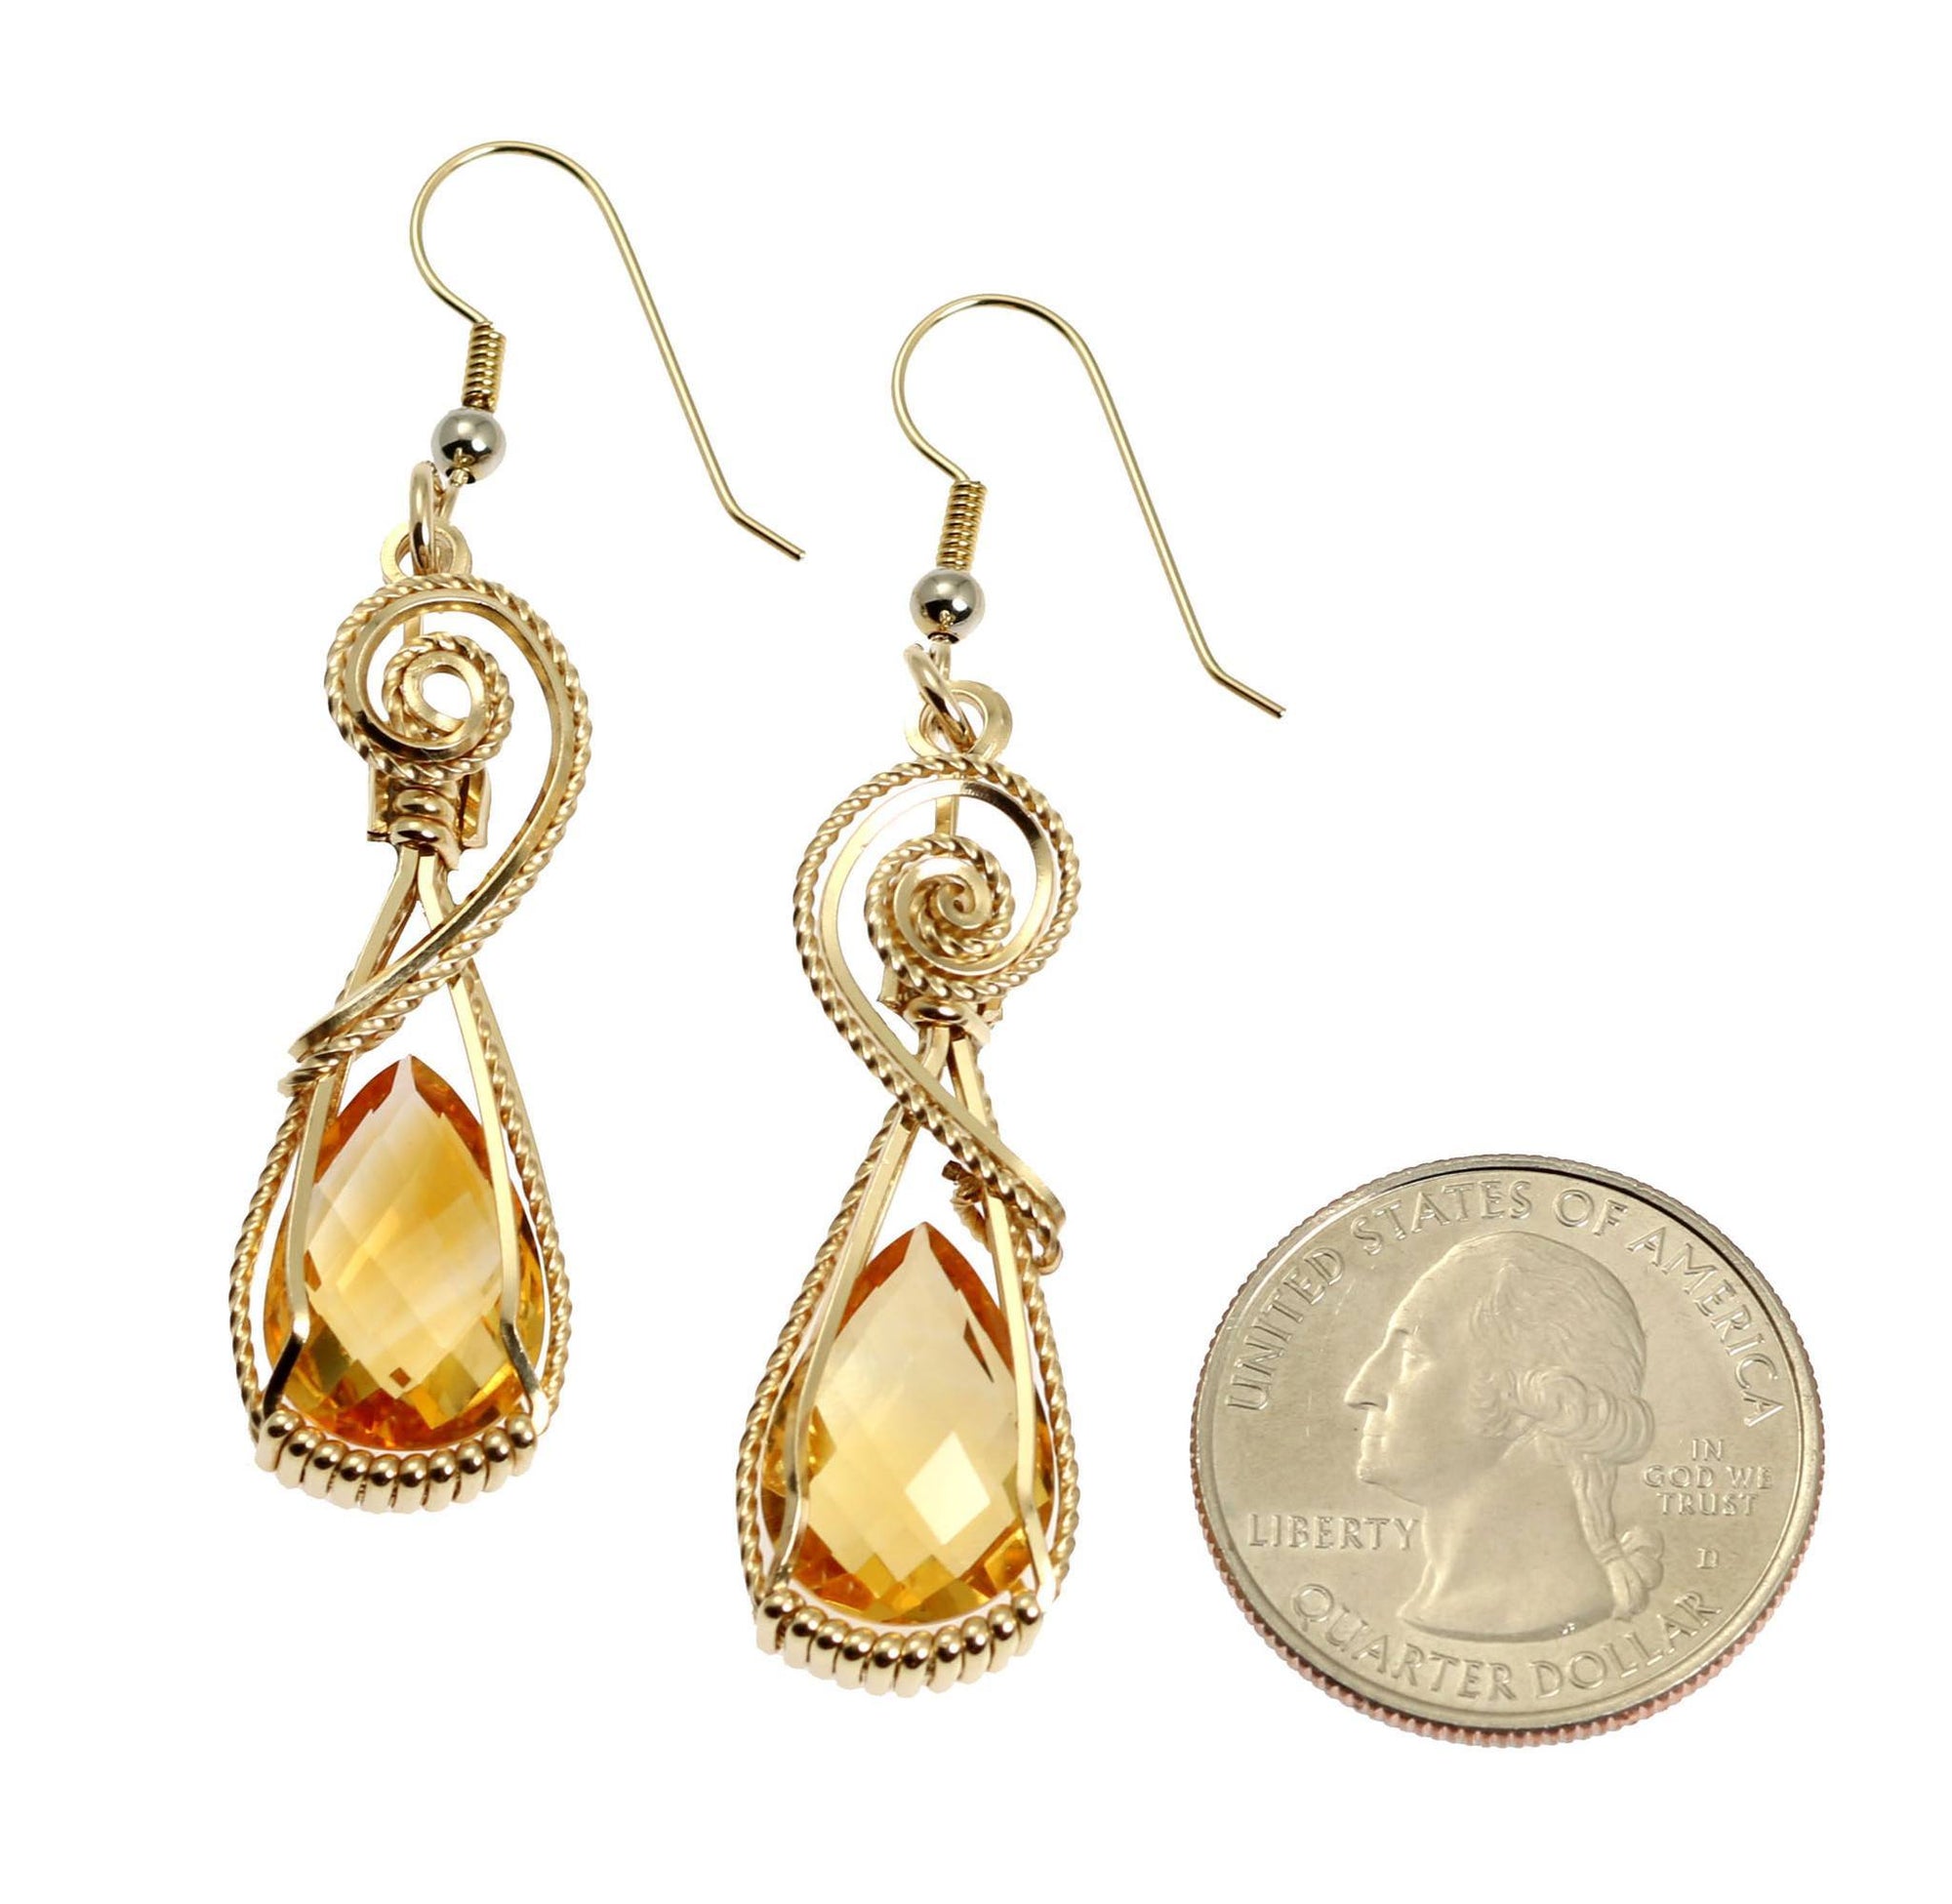 Size of 21 CT Checkerboard Citrine 14K Gold-filled Earrings